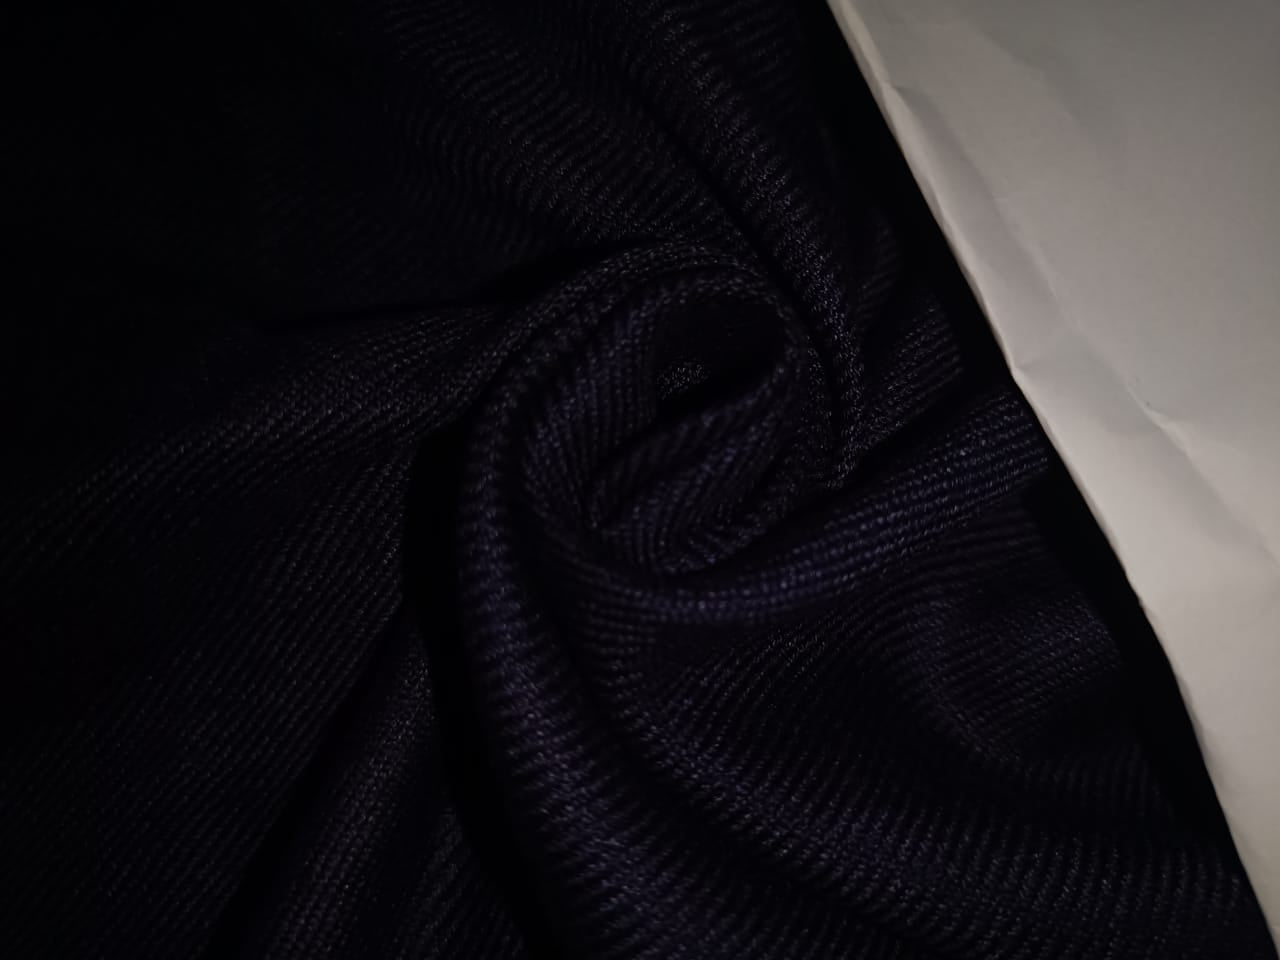 100% viscose / Cashmere [Pashmina] Fabric 44" wide available in three colors